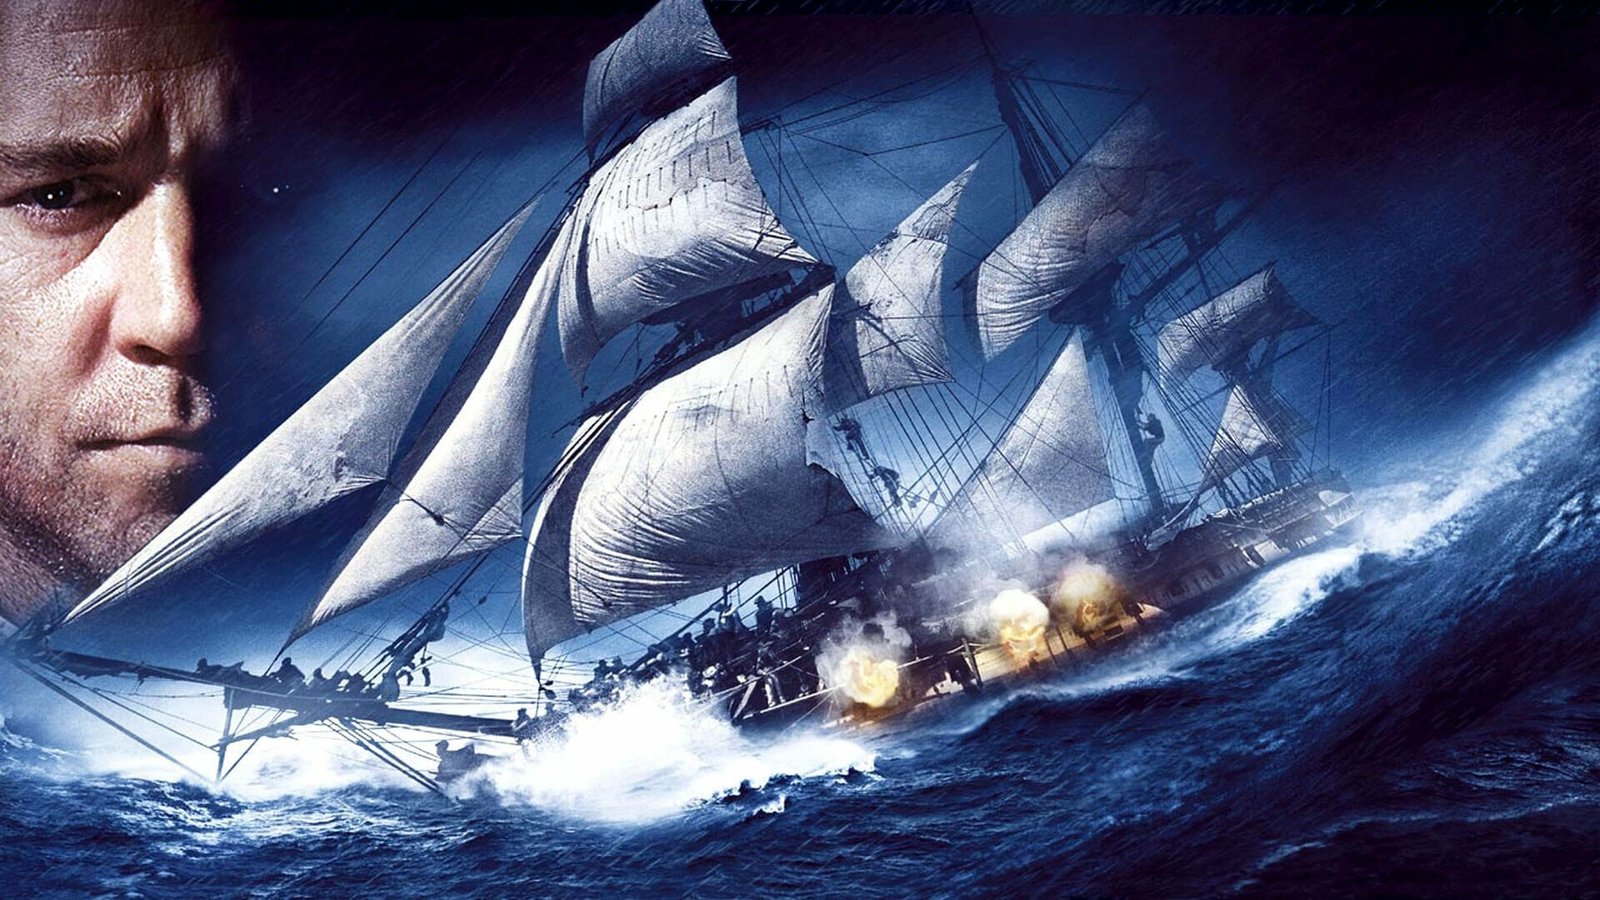 Action Movies on Hulu: Master and Commander: The Far Side of the World